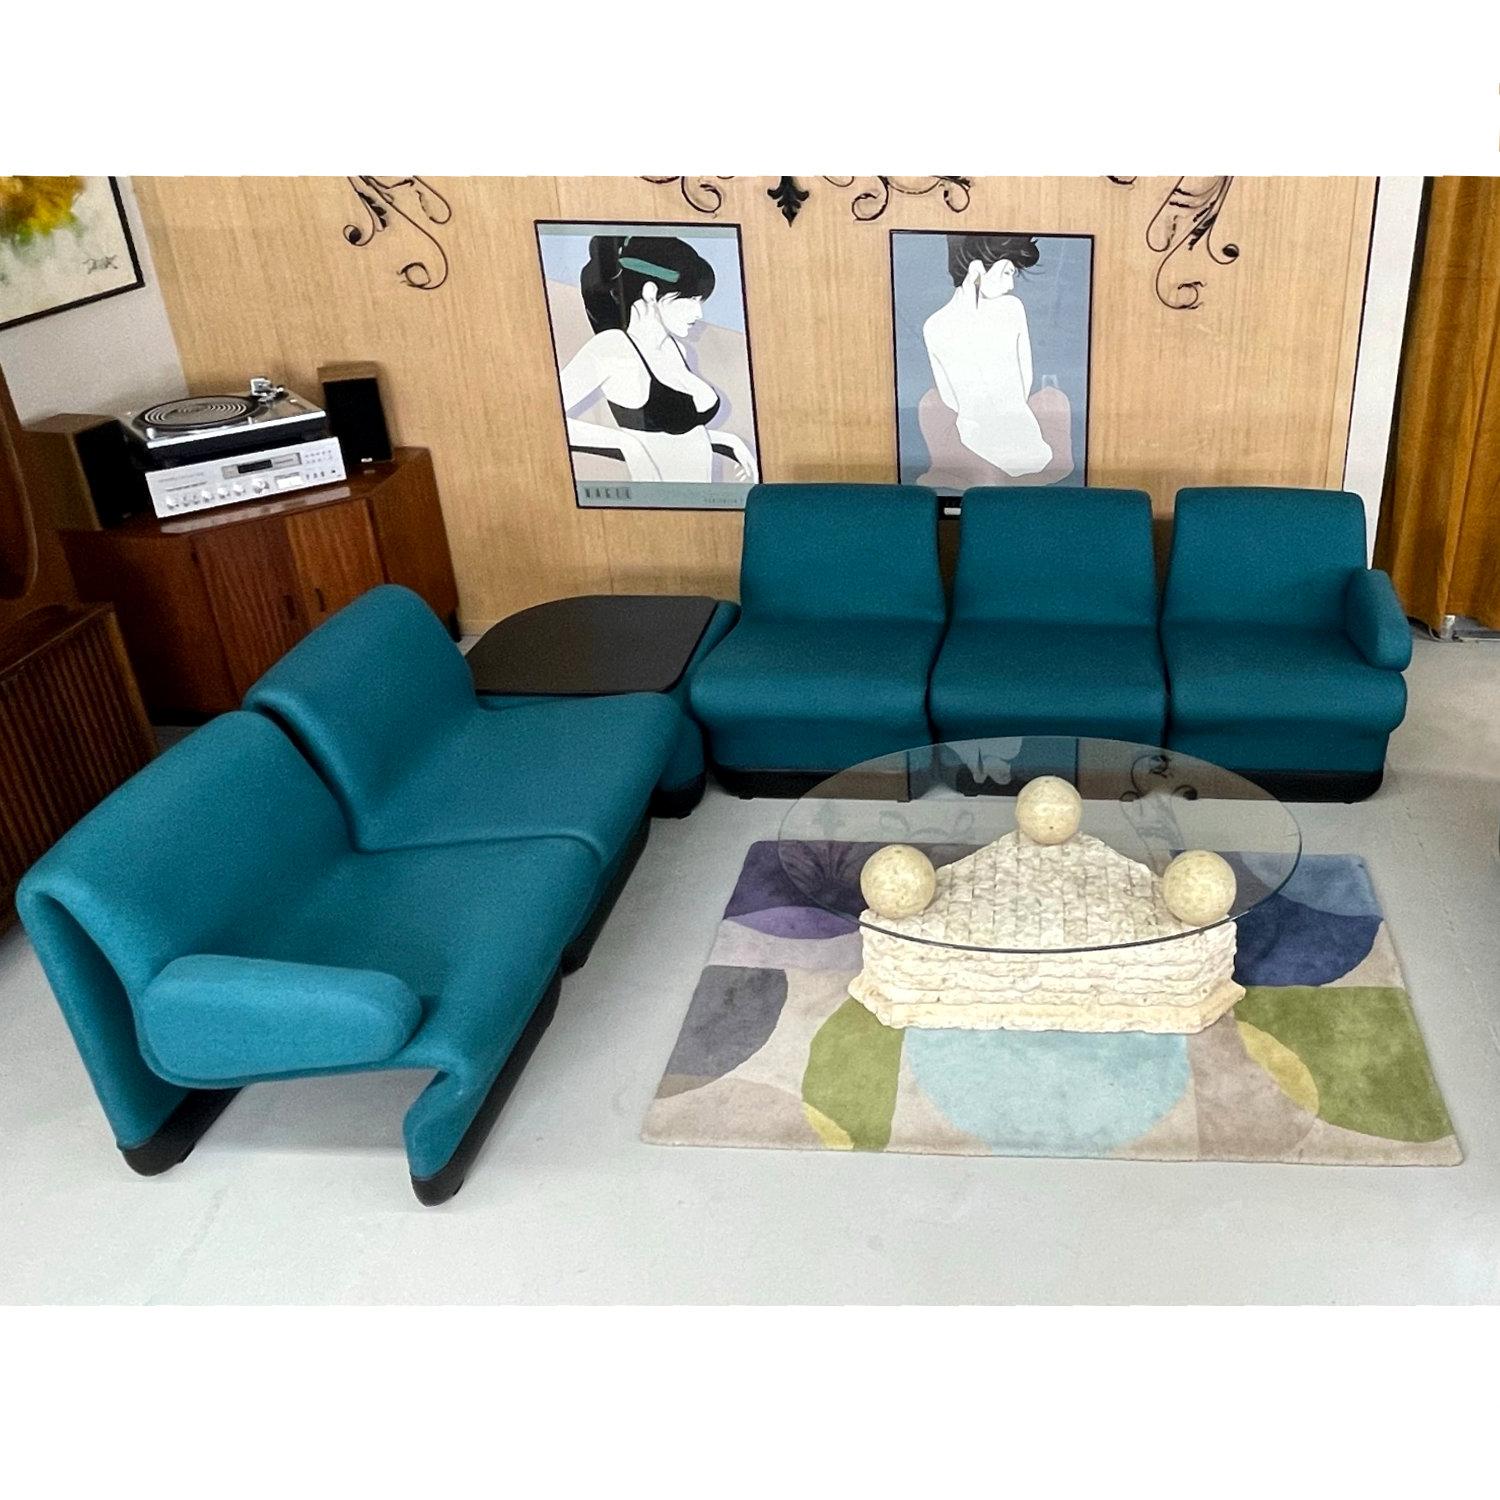 We can neither confirm nor deny that these Paul Boulva modular seating group has seen screen time on Start Trek: The Next Generation, but the teal color resemblance to the Ten Forward chairs is uncanny. The iconic show aired during the 1987-1994